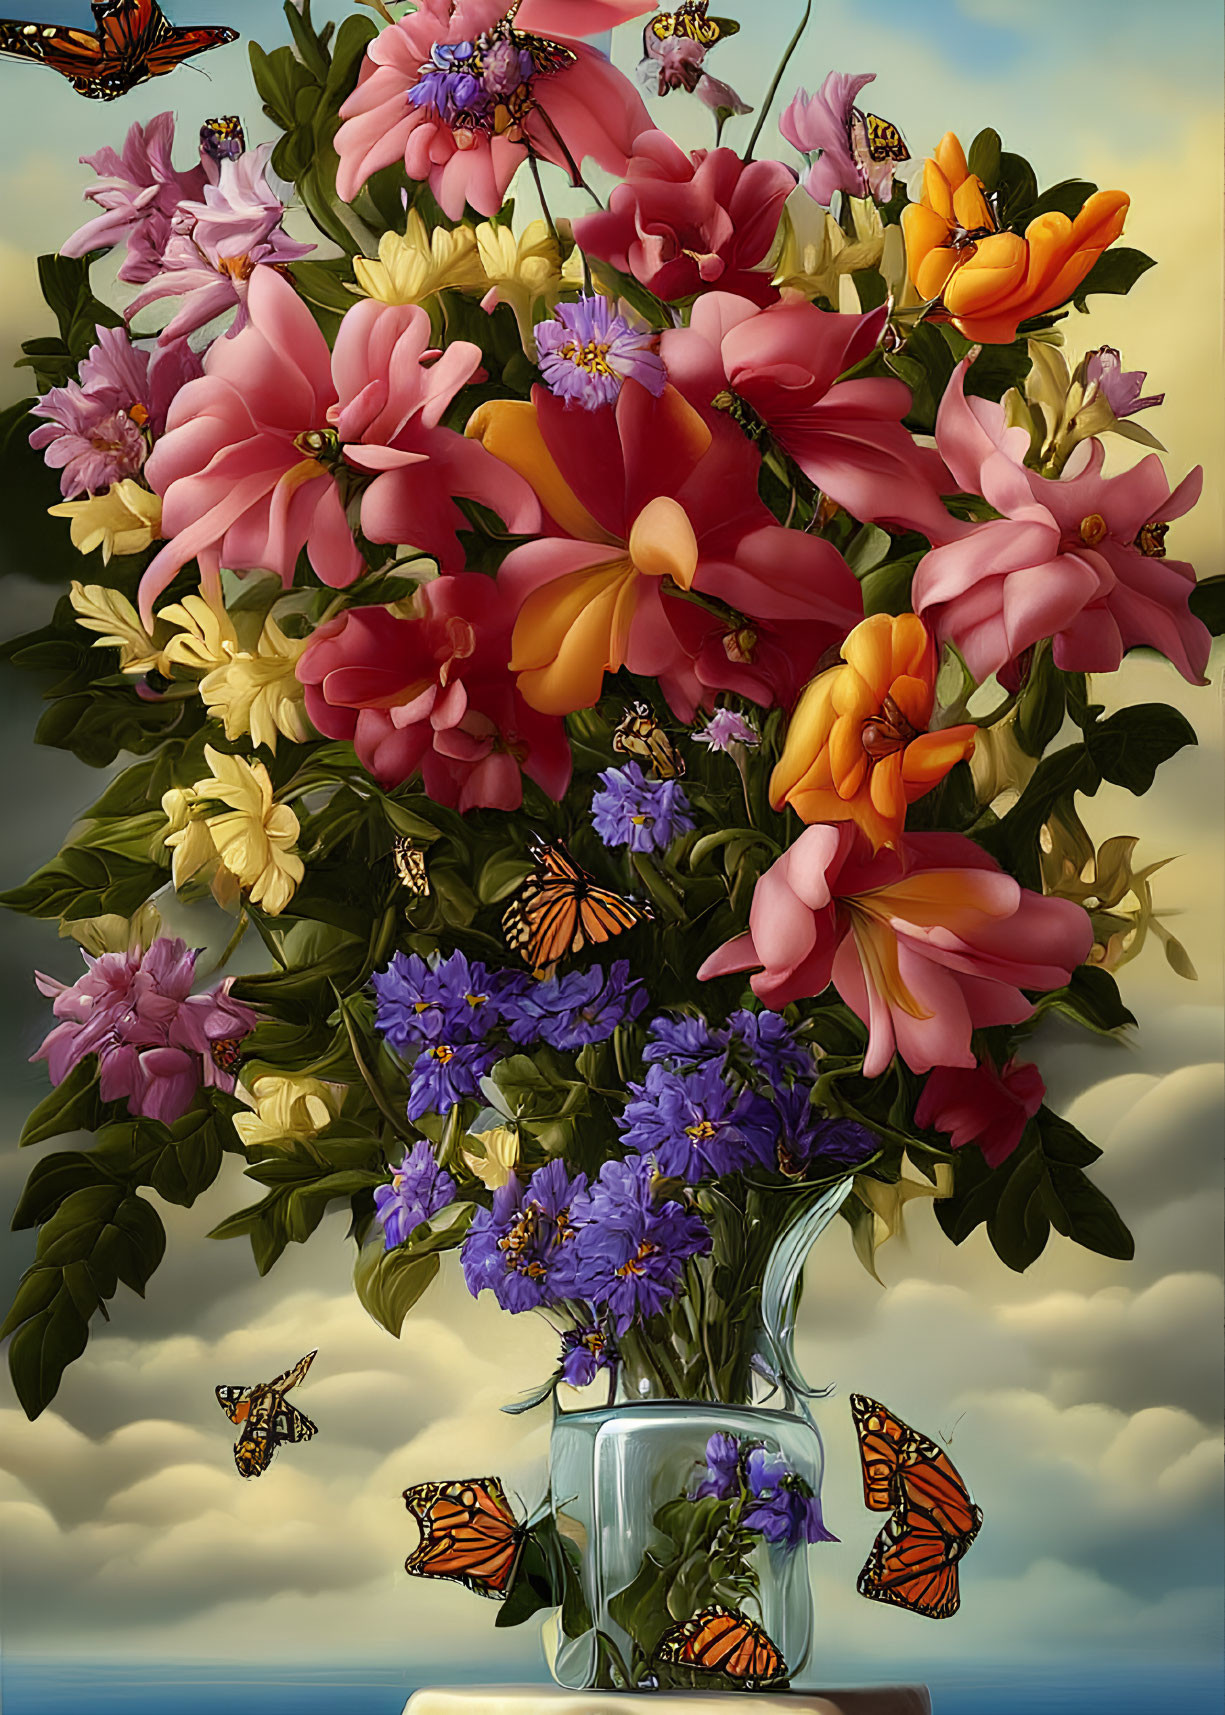 Colorful bouquet with pink, yellow, and blue flowers in glass vase with orange butterflies on cloudy sky